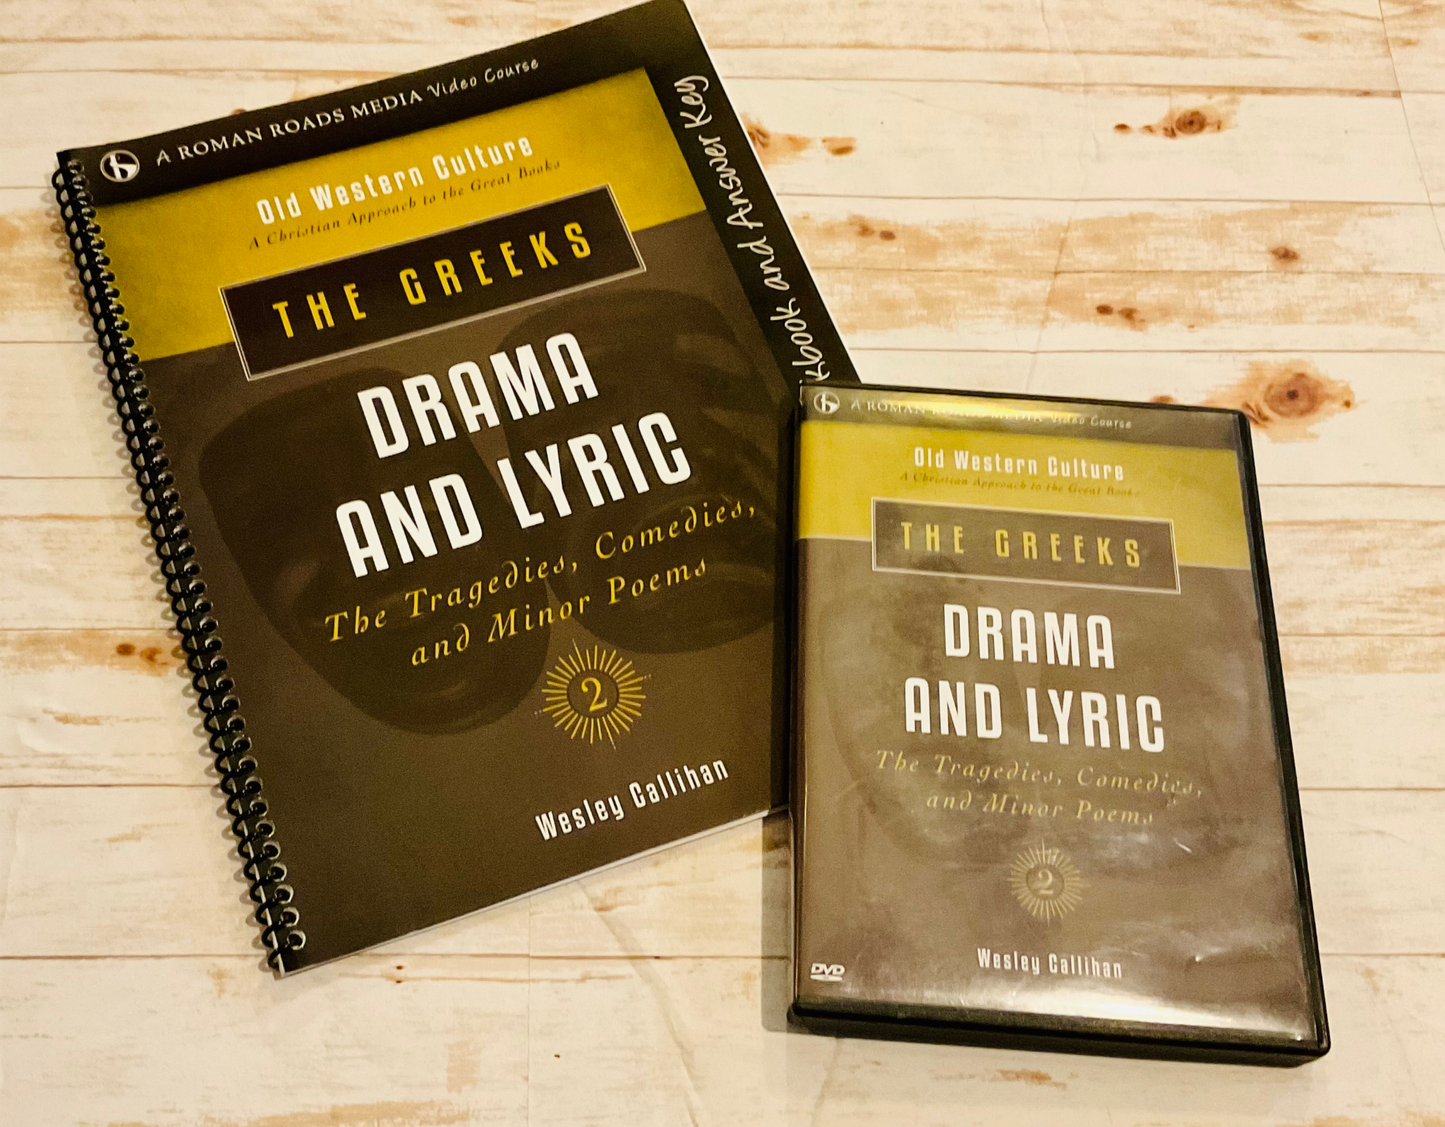 Old Western Culture: The Greeks Drama and Lyric - Anchored Homeschool Resource Center